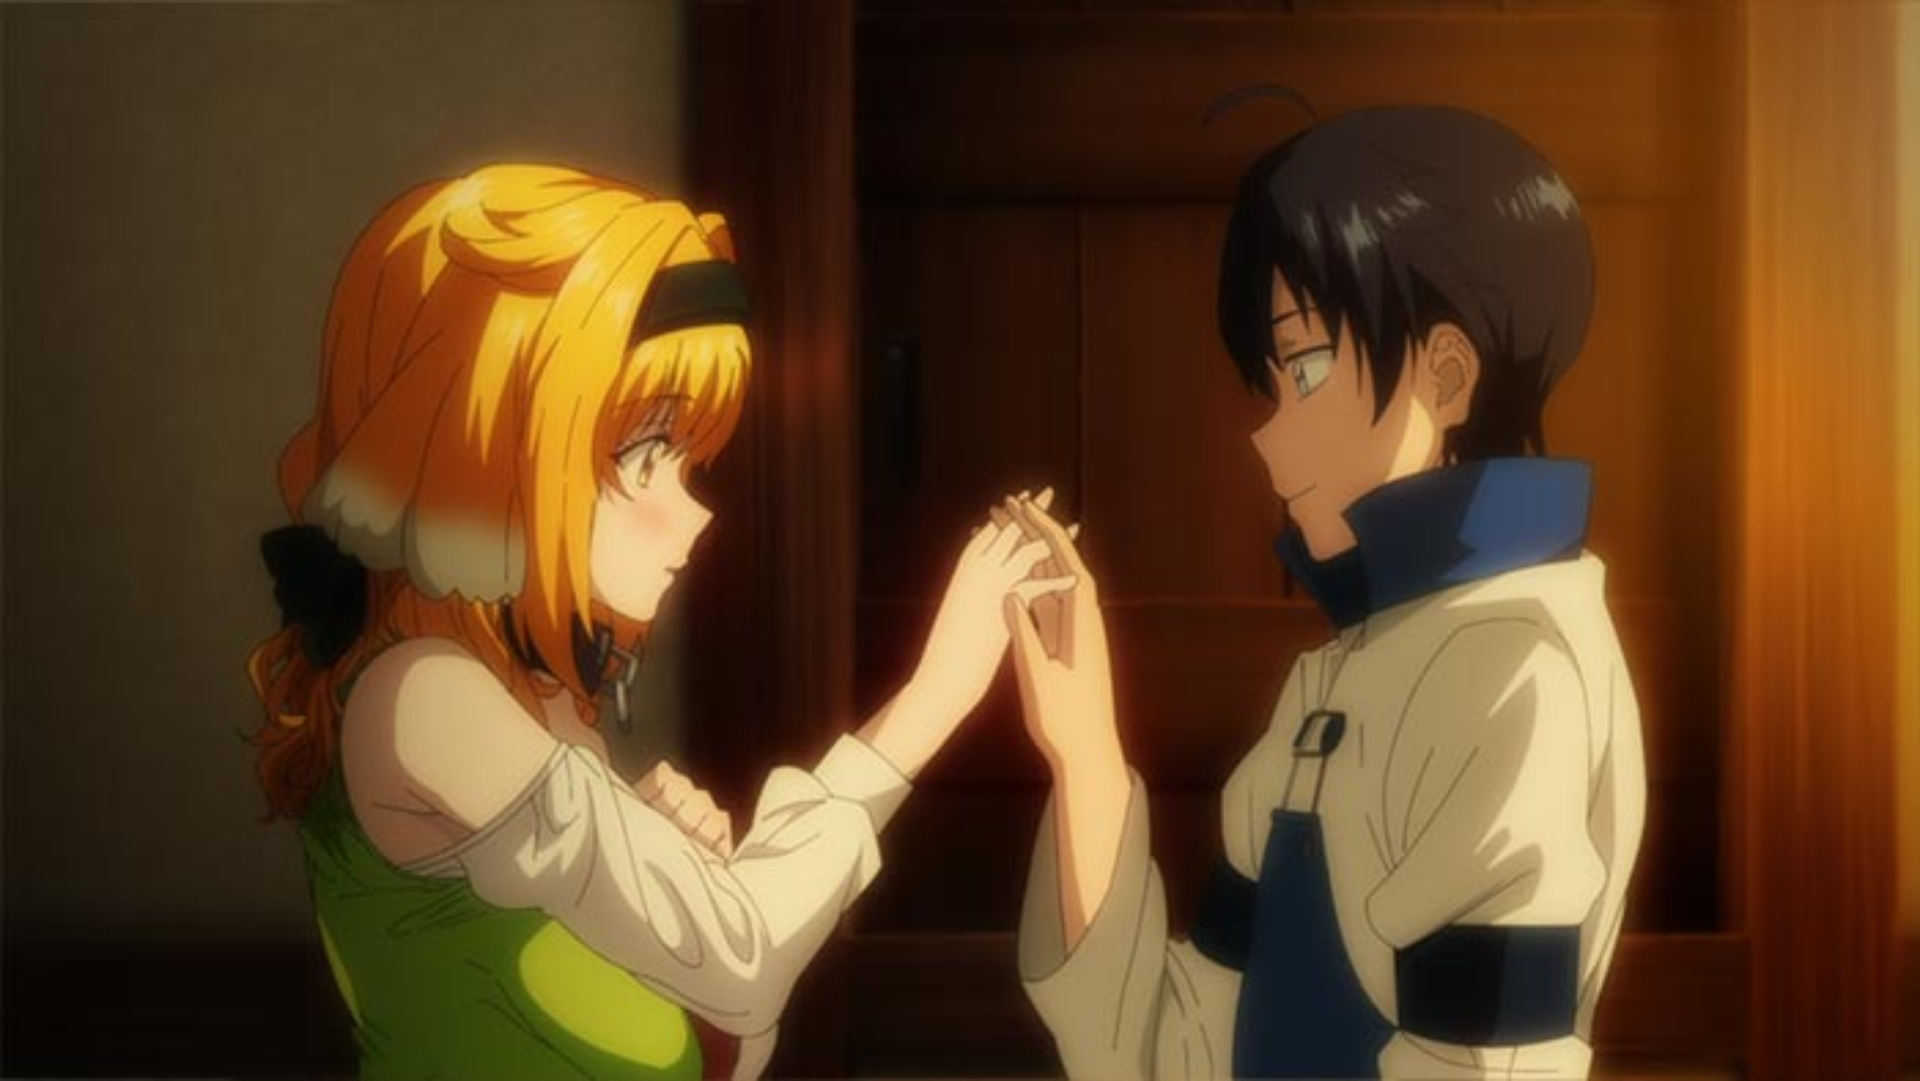 Anime Corner News - NEWS: Harem in the Labyrinth of Another World